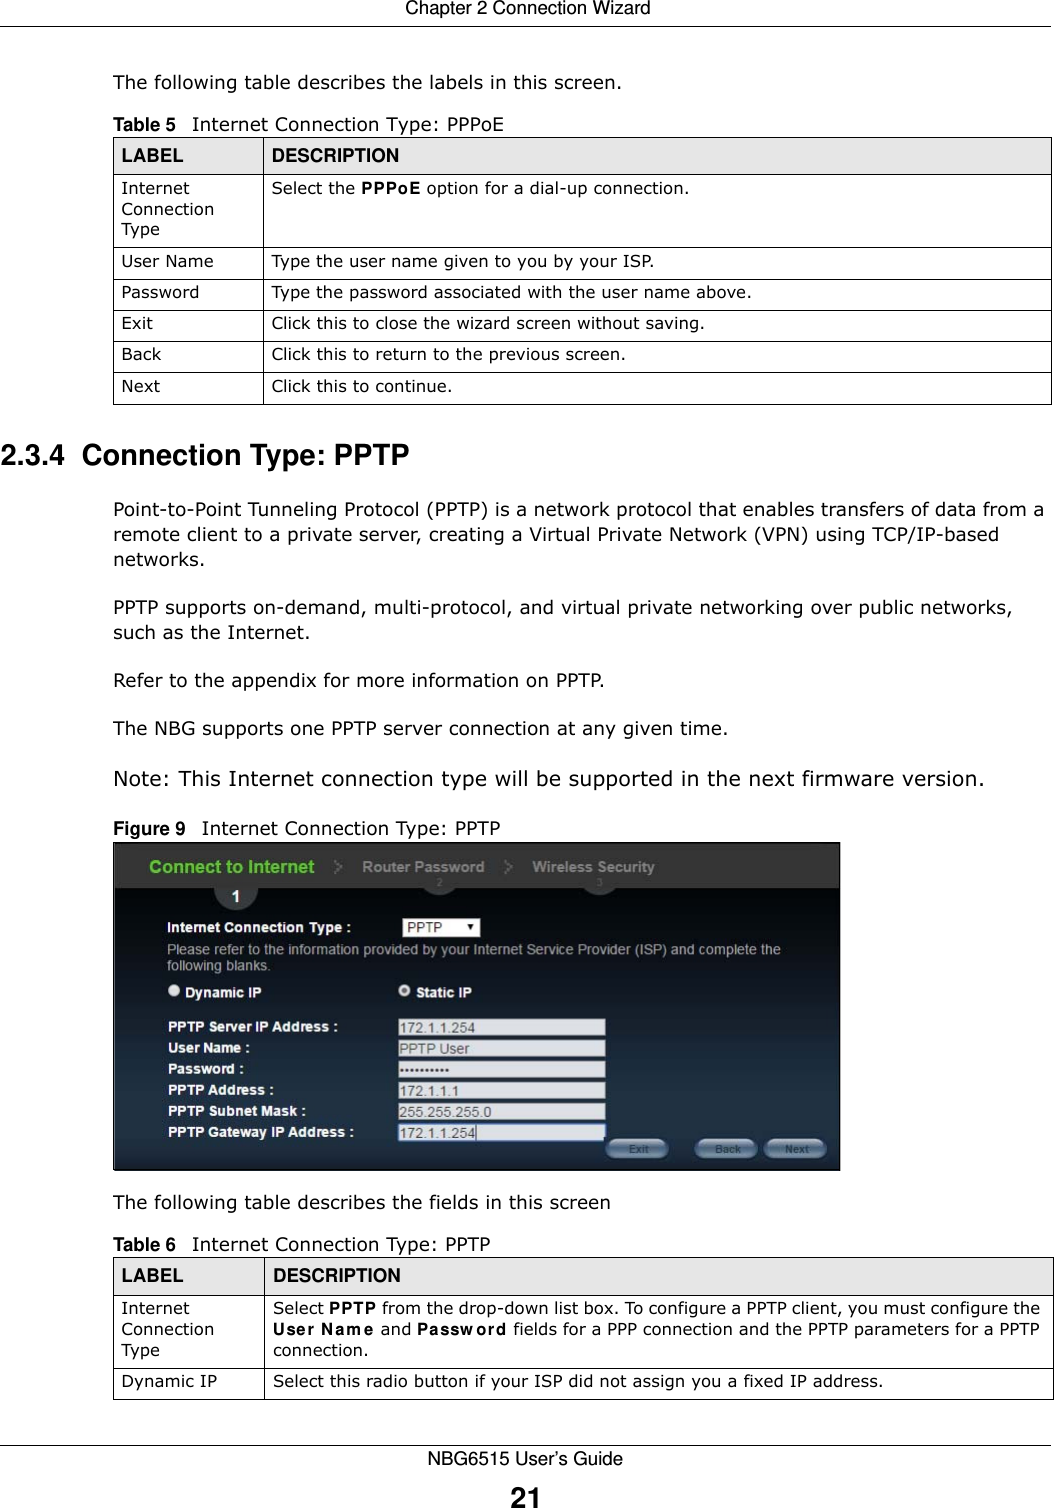  Chapter 2 Connection WizardNBG6515 User’s Guide21The following table describes the labels in this screen.2.3.4  Connection Type: PPTPPoint-to-Point Tunneling Protocol (PPTP) is a network protocol that enables transfers of data from a remote client to a private server, creating a Virtual Private Network (VPN) using TCP/IP-based networks.PPTP supports on-demand, multi-protocol, and virtual private networking over public networks, such as the Internet.Refer to the appendix for more information on PPTP.The NBG supports one PPTP server connection at any given time.Note: This Internet connection type will be supported in the next firmware version.Figure 9   Internet Connection Type: PPTP The following table describes the fields in this screenTable 5   Internet Connection Type: PPPoELABEL DESCRIPTIONInternet Connection TypeSelect the PPPoE option for a dial-up connection.User Name Type the user name given to you by your ISP. Password  Type the password associated with the user name above.Exit Click this to close the wizard screen without saving.Back Click this to return to the previous screen.Next Click this to continue. Table 6   Internet Connection Type: PPTPLABEL DESCRIPTIONInternet Connection TypeSelect PPTP from the drop-down list box. To configure a PPTP client, you must configure the User Name and Password fields for a PPP connection and the PPTP parameters for a PPTP connection.Dynamic IP Select this radio button if your ISP did not assign you a fixed IP address.